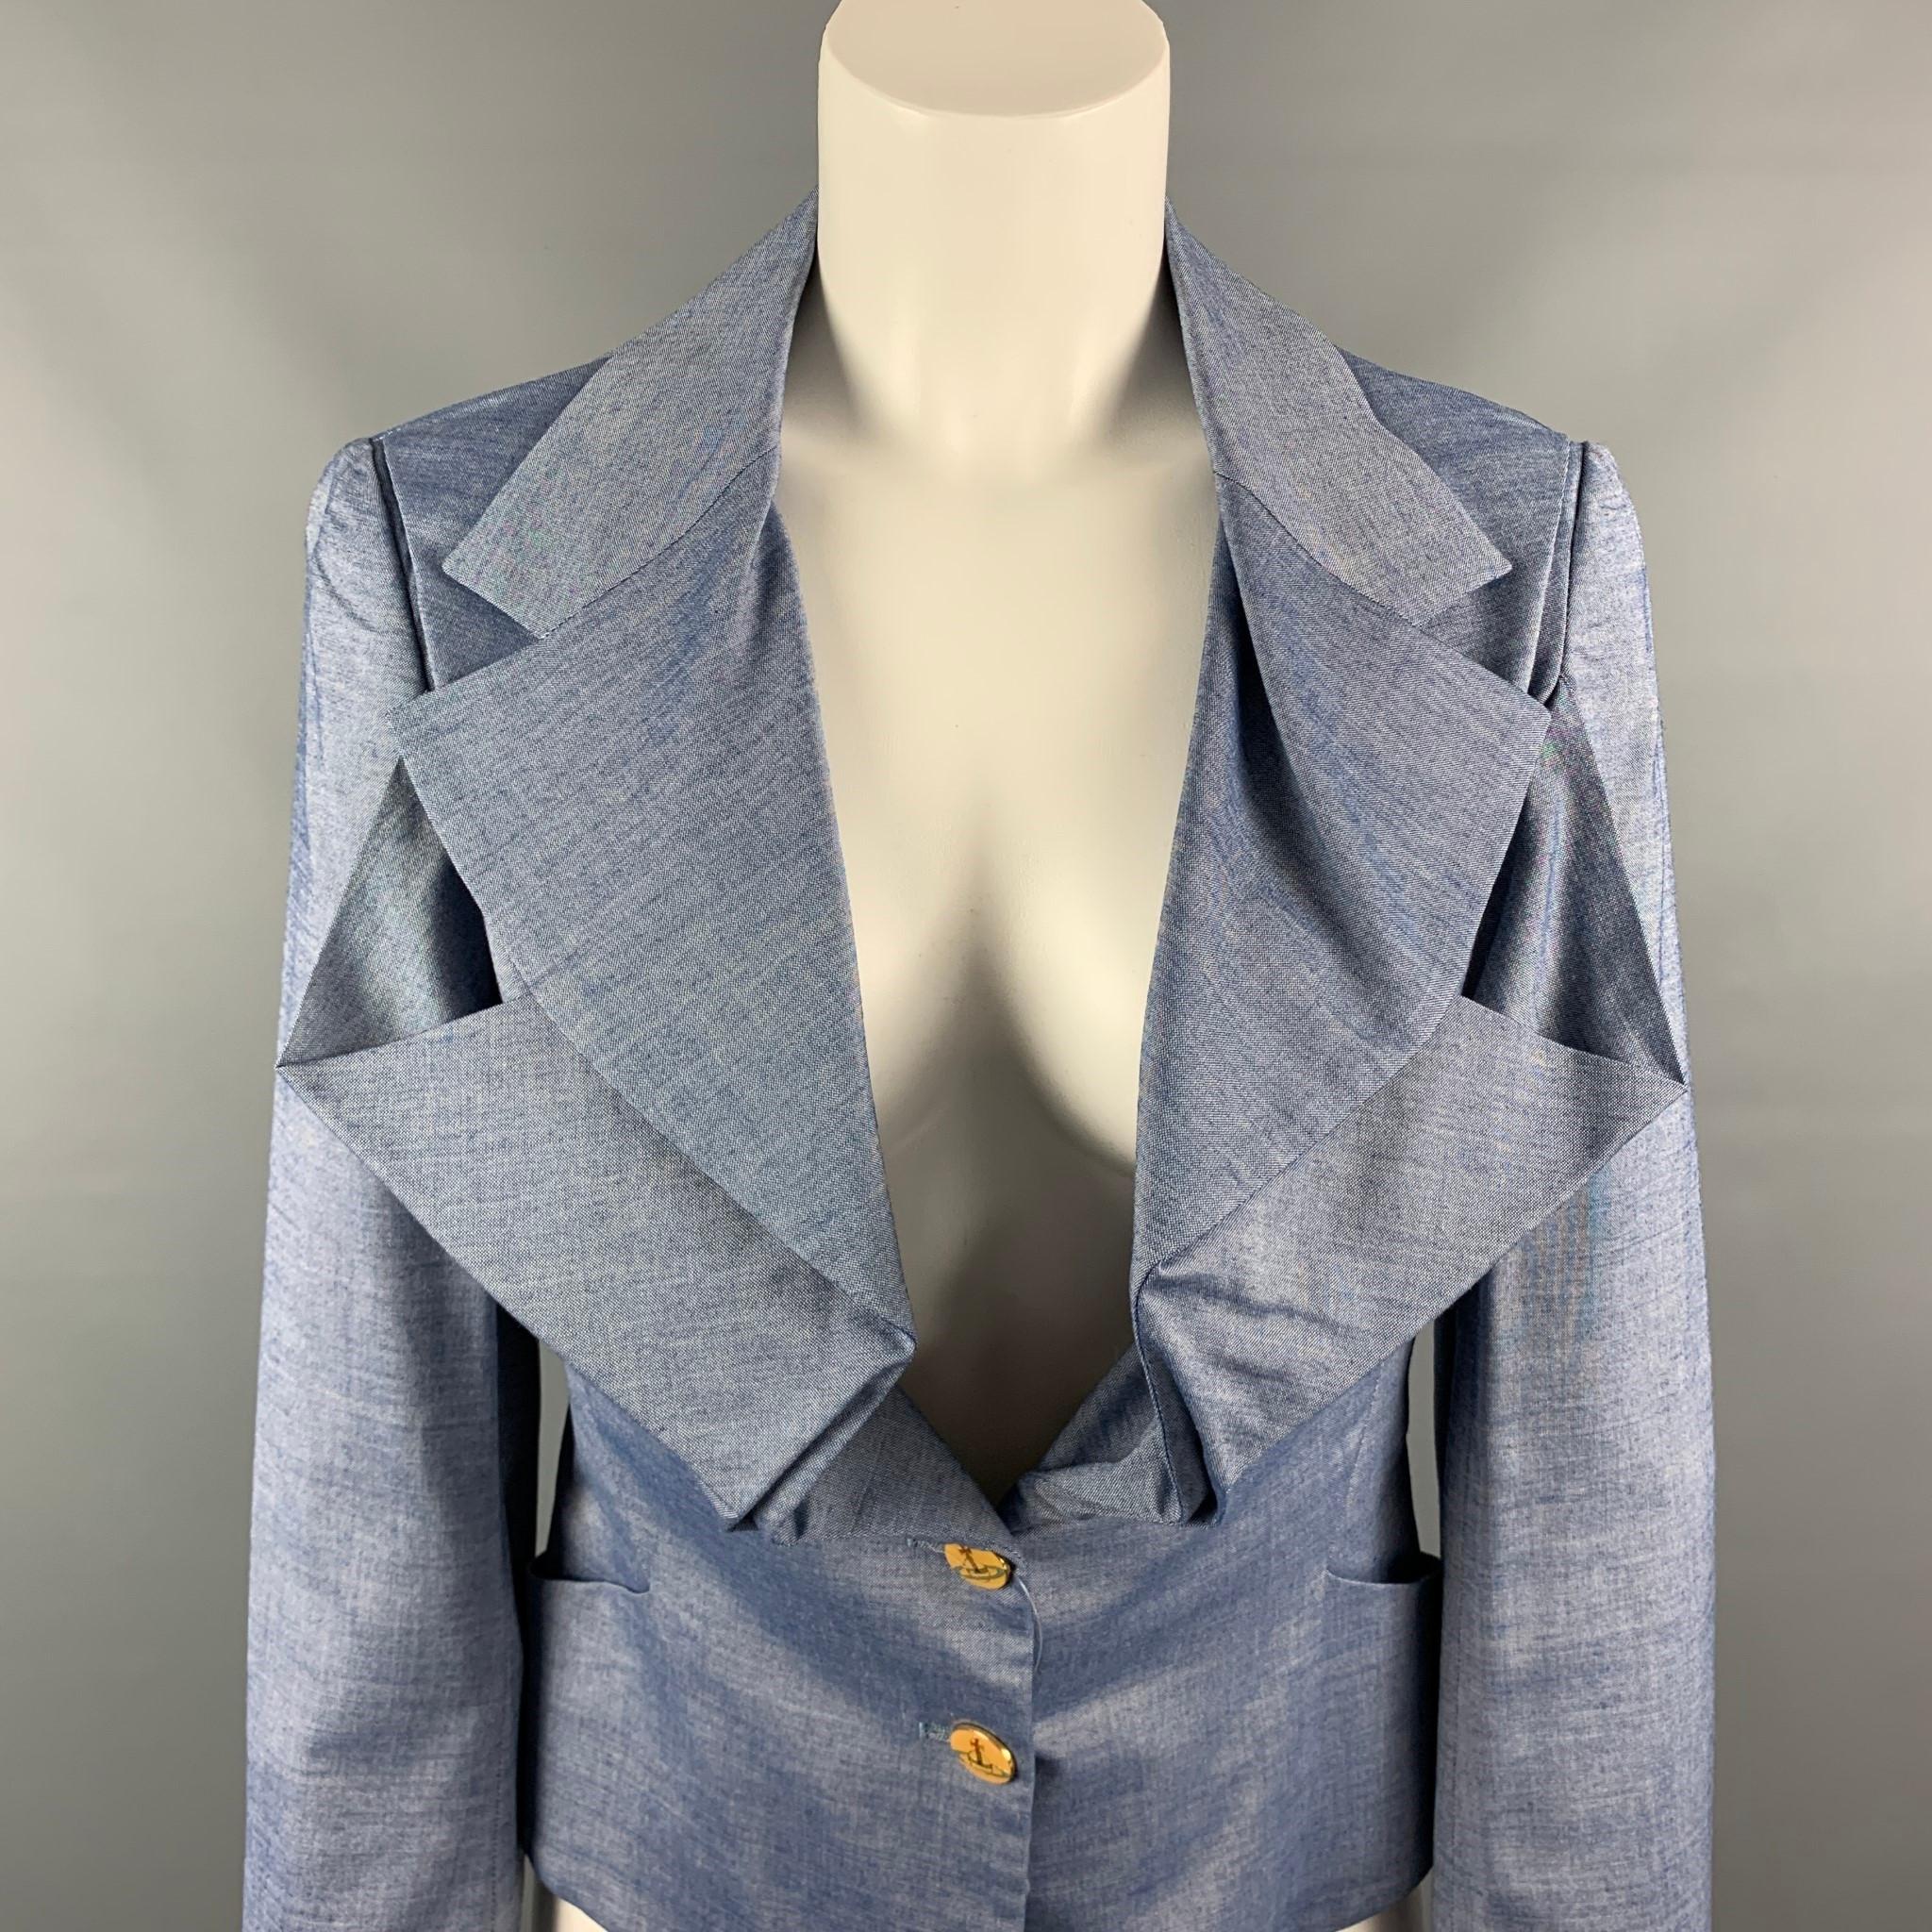 VIVIENNE WESTWOOD RED LABEL jacket comes in a blue wool blend with a full monogram print liner featuring a large ruffled collar, slit pockets, and a double buttoned closure.

Very Good Pre-Owned Condition.
Marked: 42

Measurements:

Shoulder: 16 in.